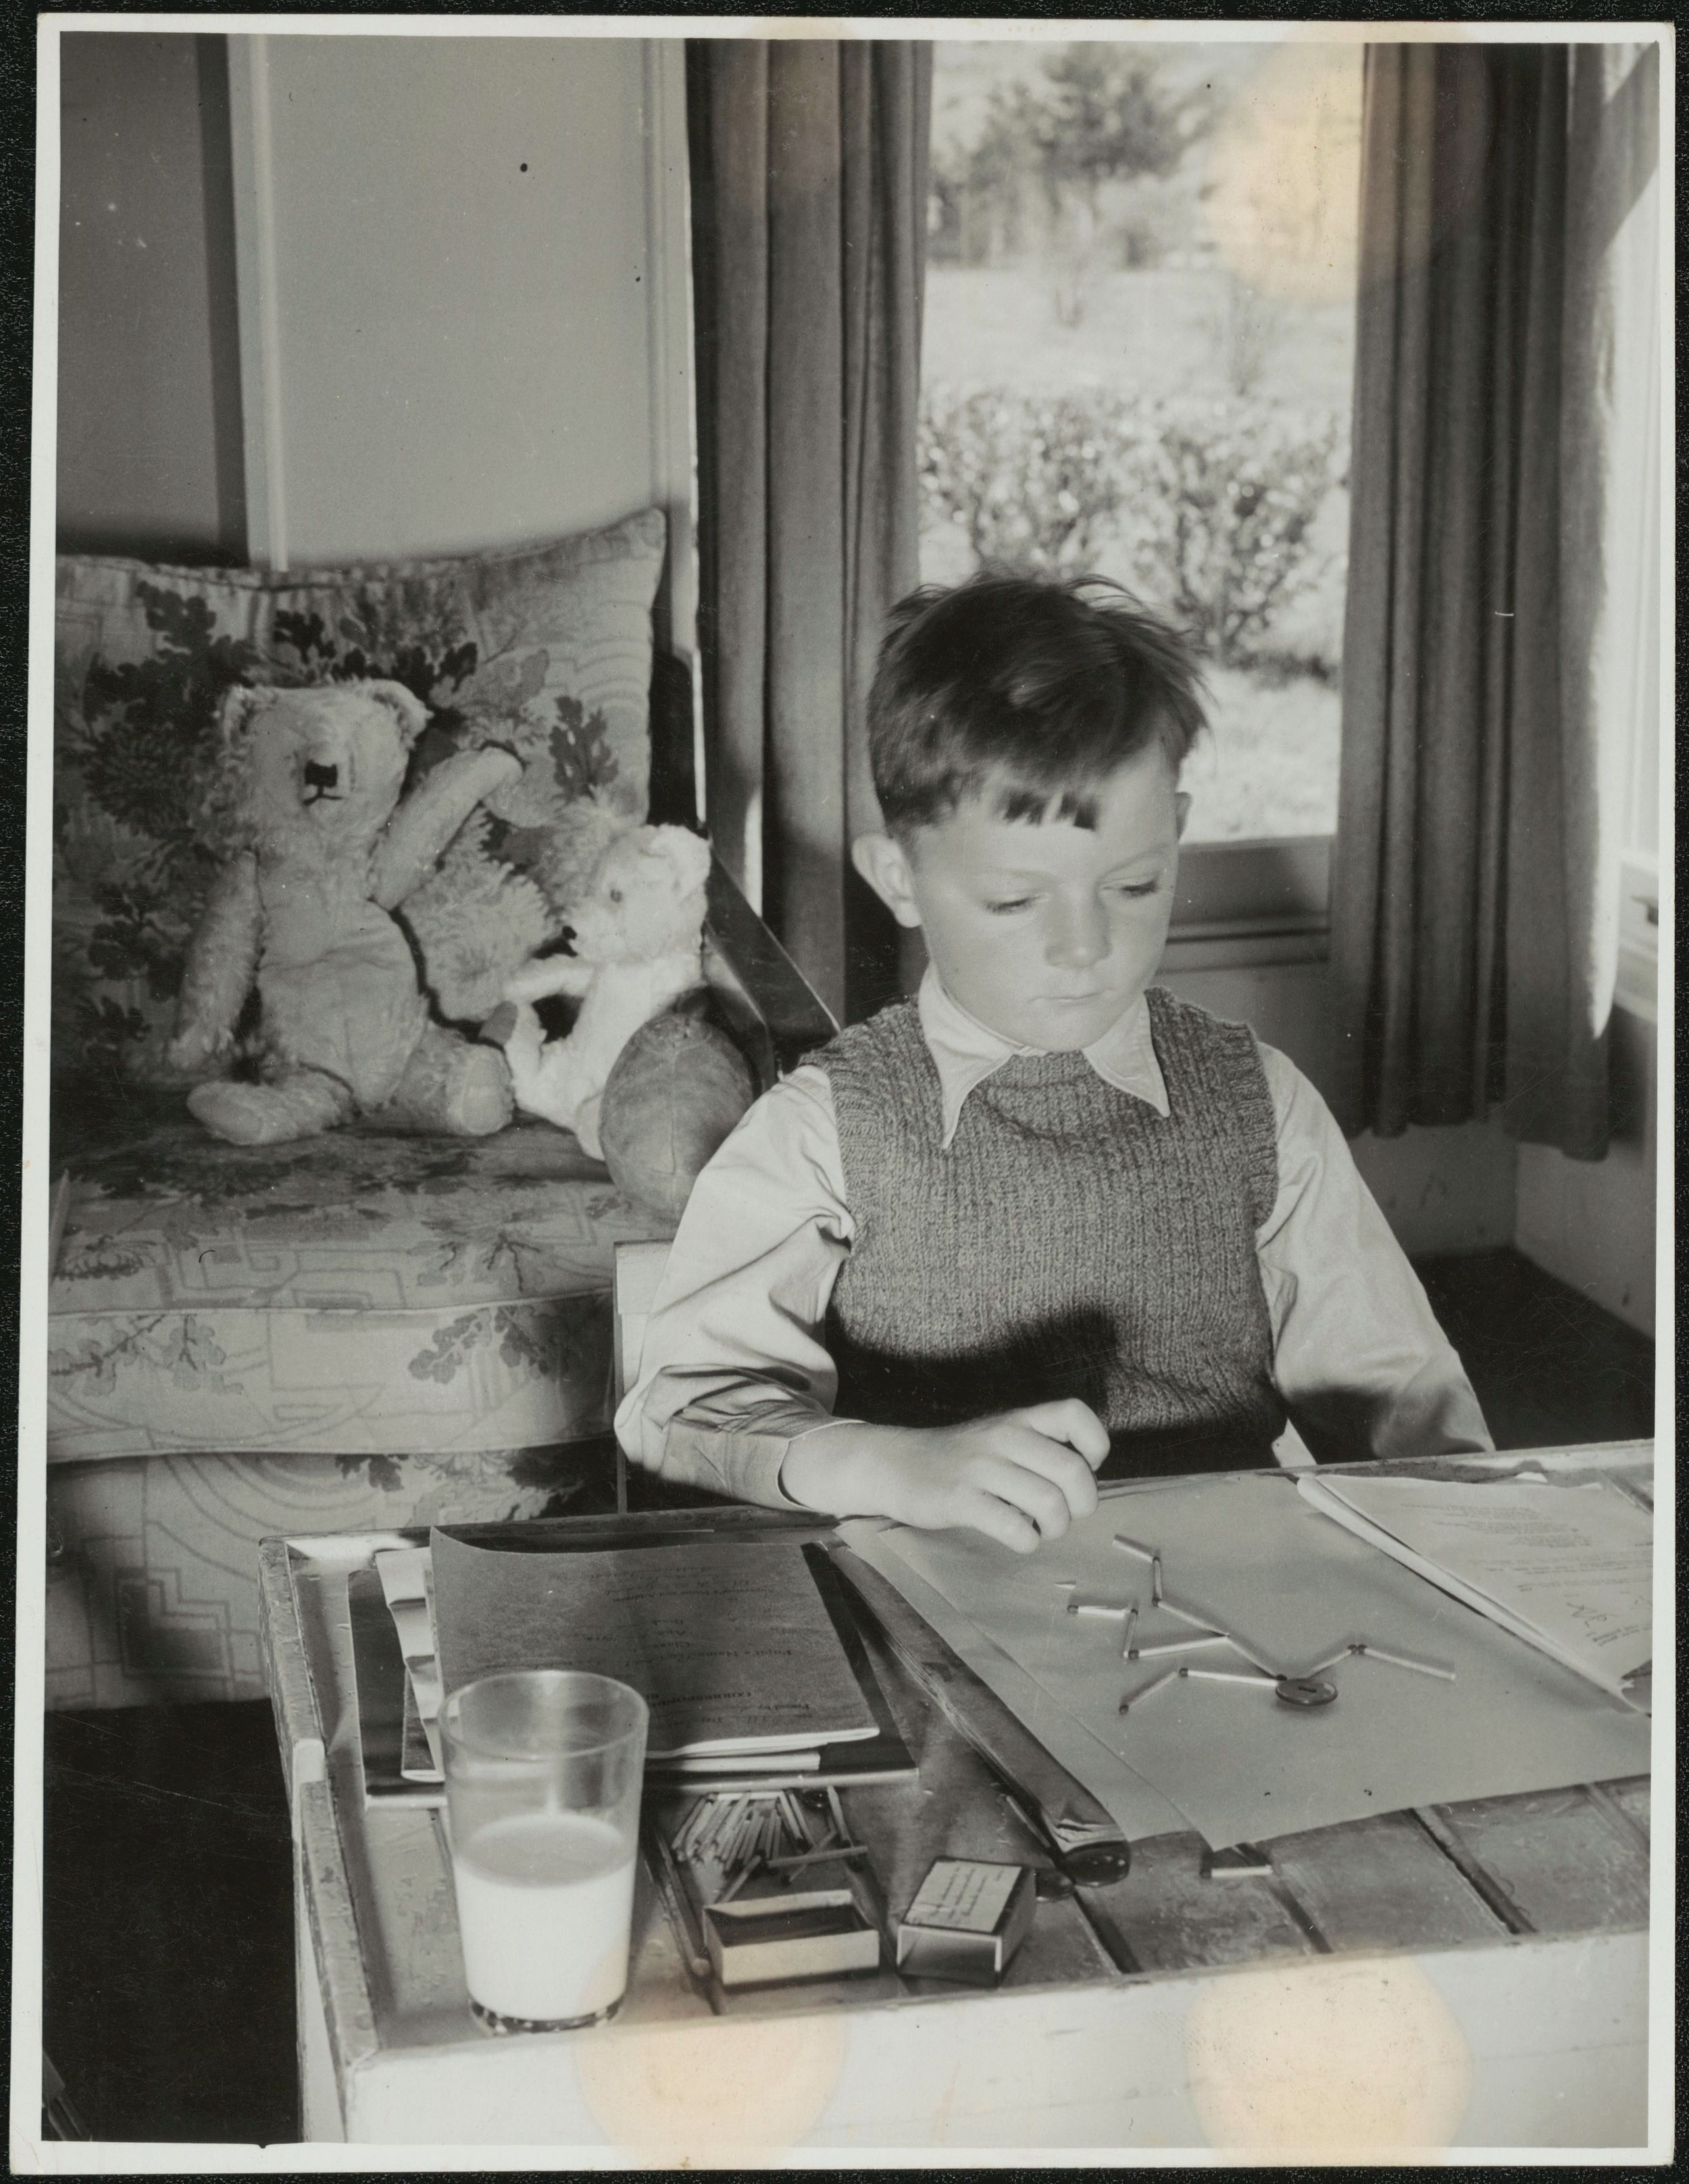 A boy sits at his desk making a match stick man. A glass of milk is on the desk and his teddy bears sit on a chair behind him